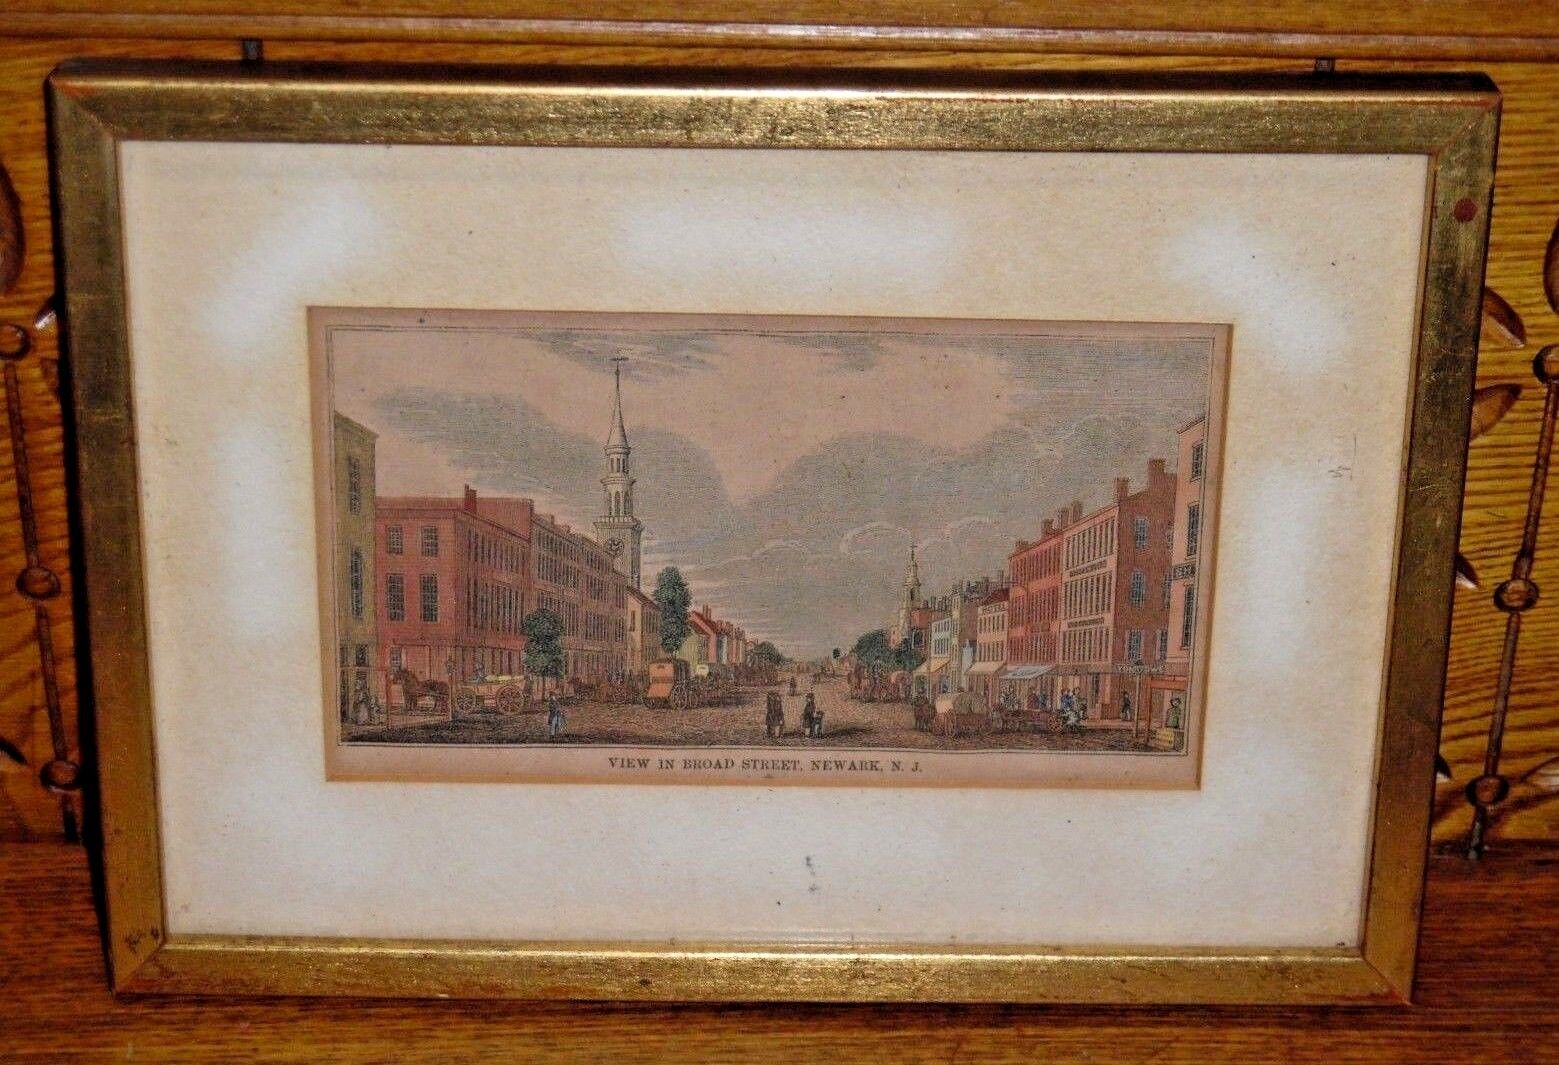 Antique Small Framed Color Engraving - View In Broad Street, Newark NJ